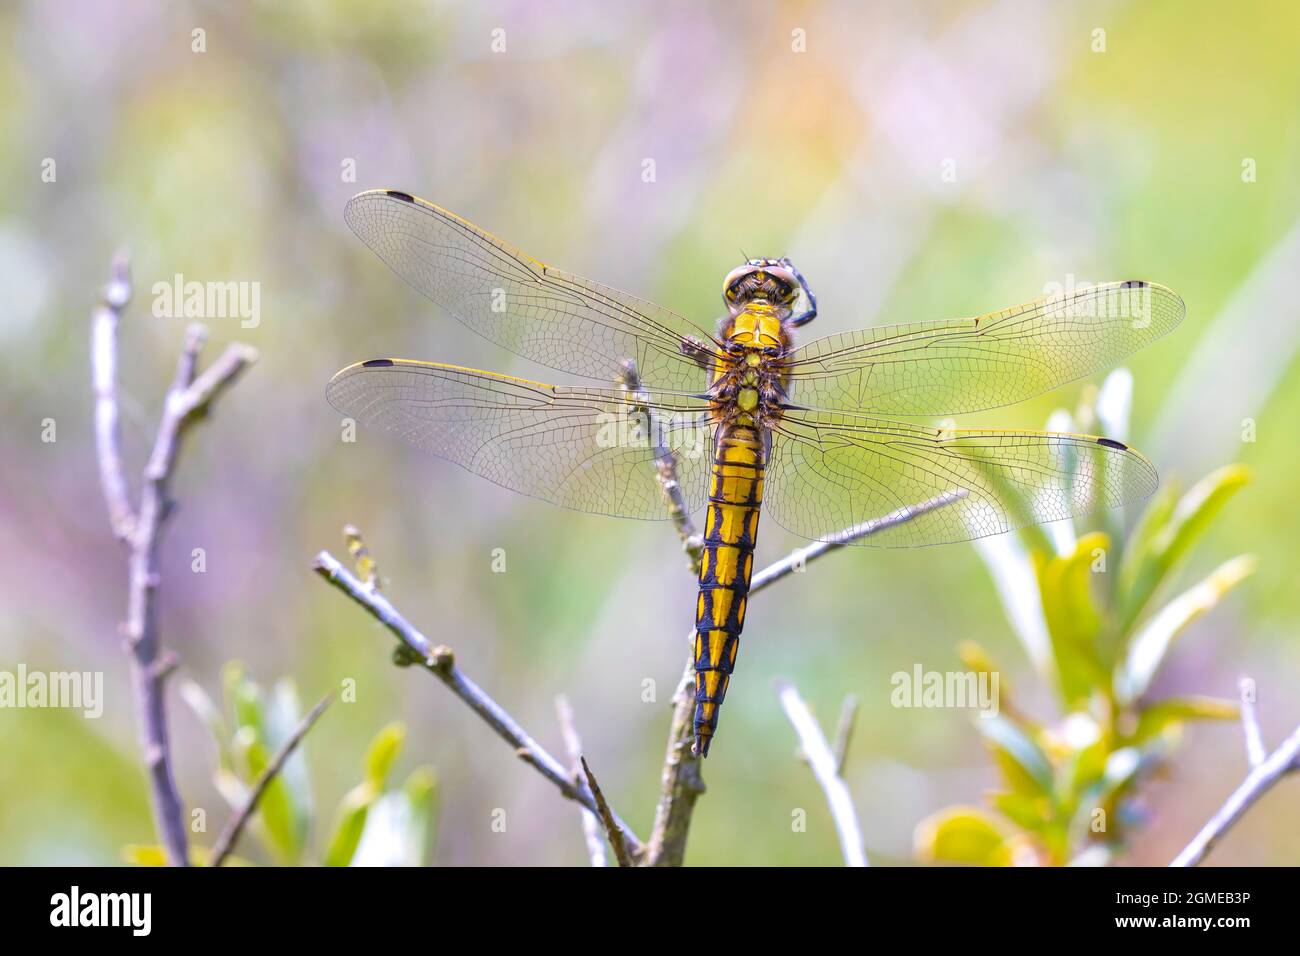 Black-tailed skimmer, Orthetrum cancellatum, is a dragonfly of Europe and Asia. A female specie is resting, warming up in the warm summer sunlight. Stock Photo